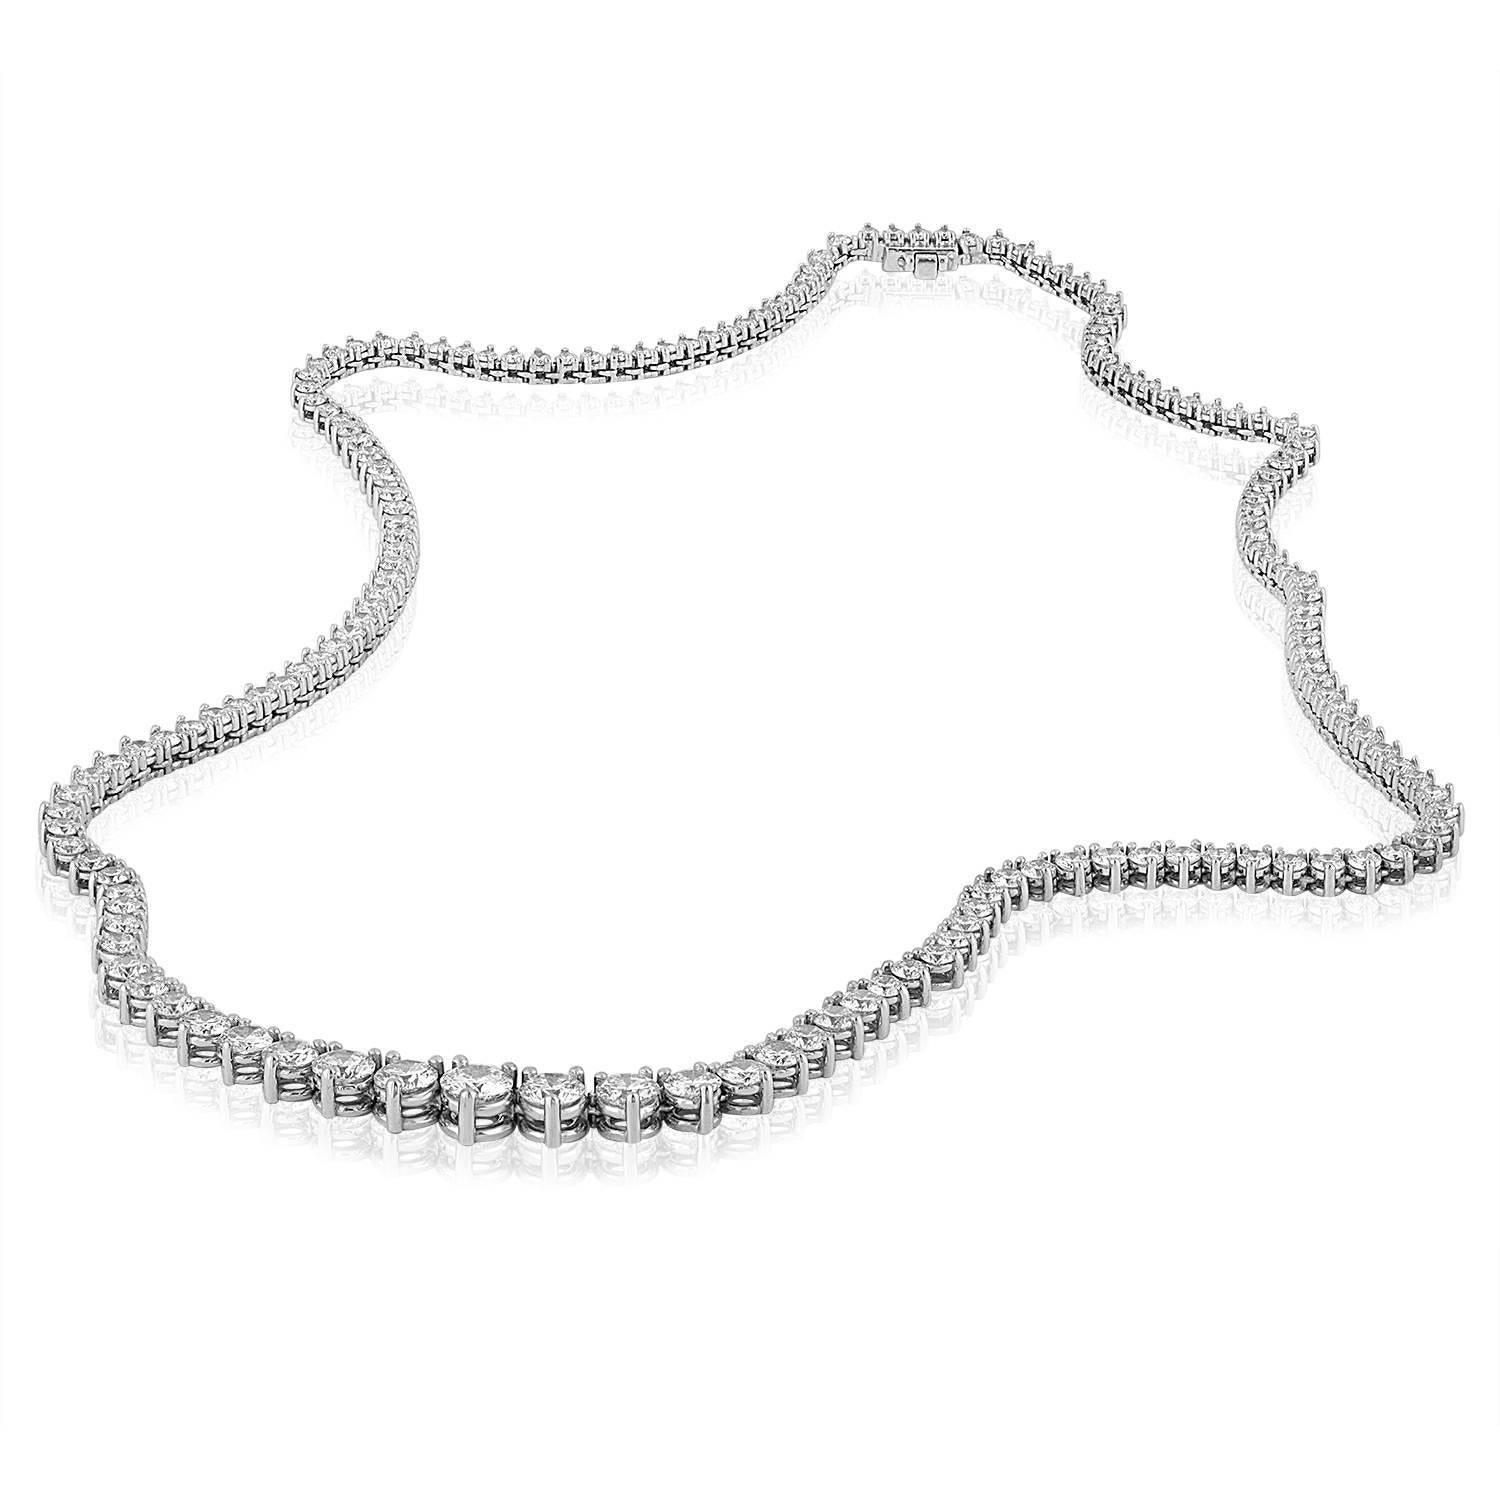 Very Classic Riviere Necklace
The necklace is 18K White Gold
There are 11.86 Carat in Diamonds E/F/G VS/SI
The necklace weighs 25.3 grams
The necklace is 18